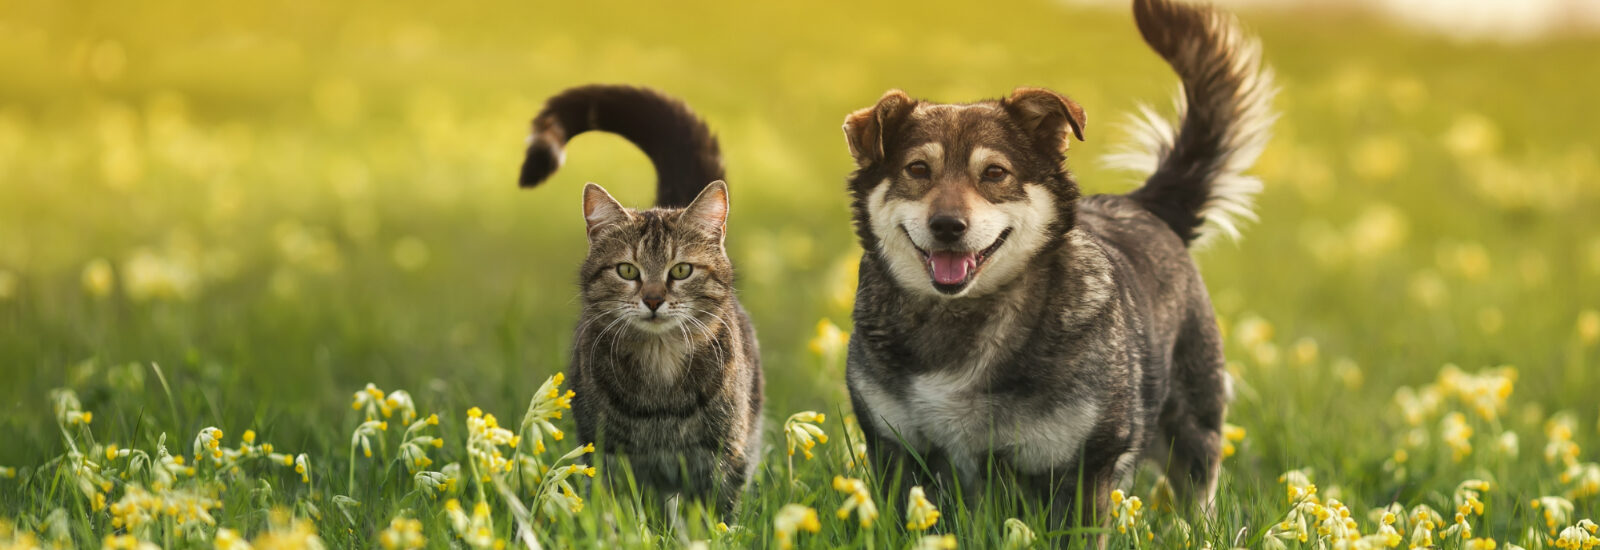 Cat and dog in field